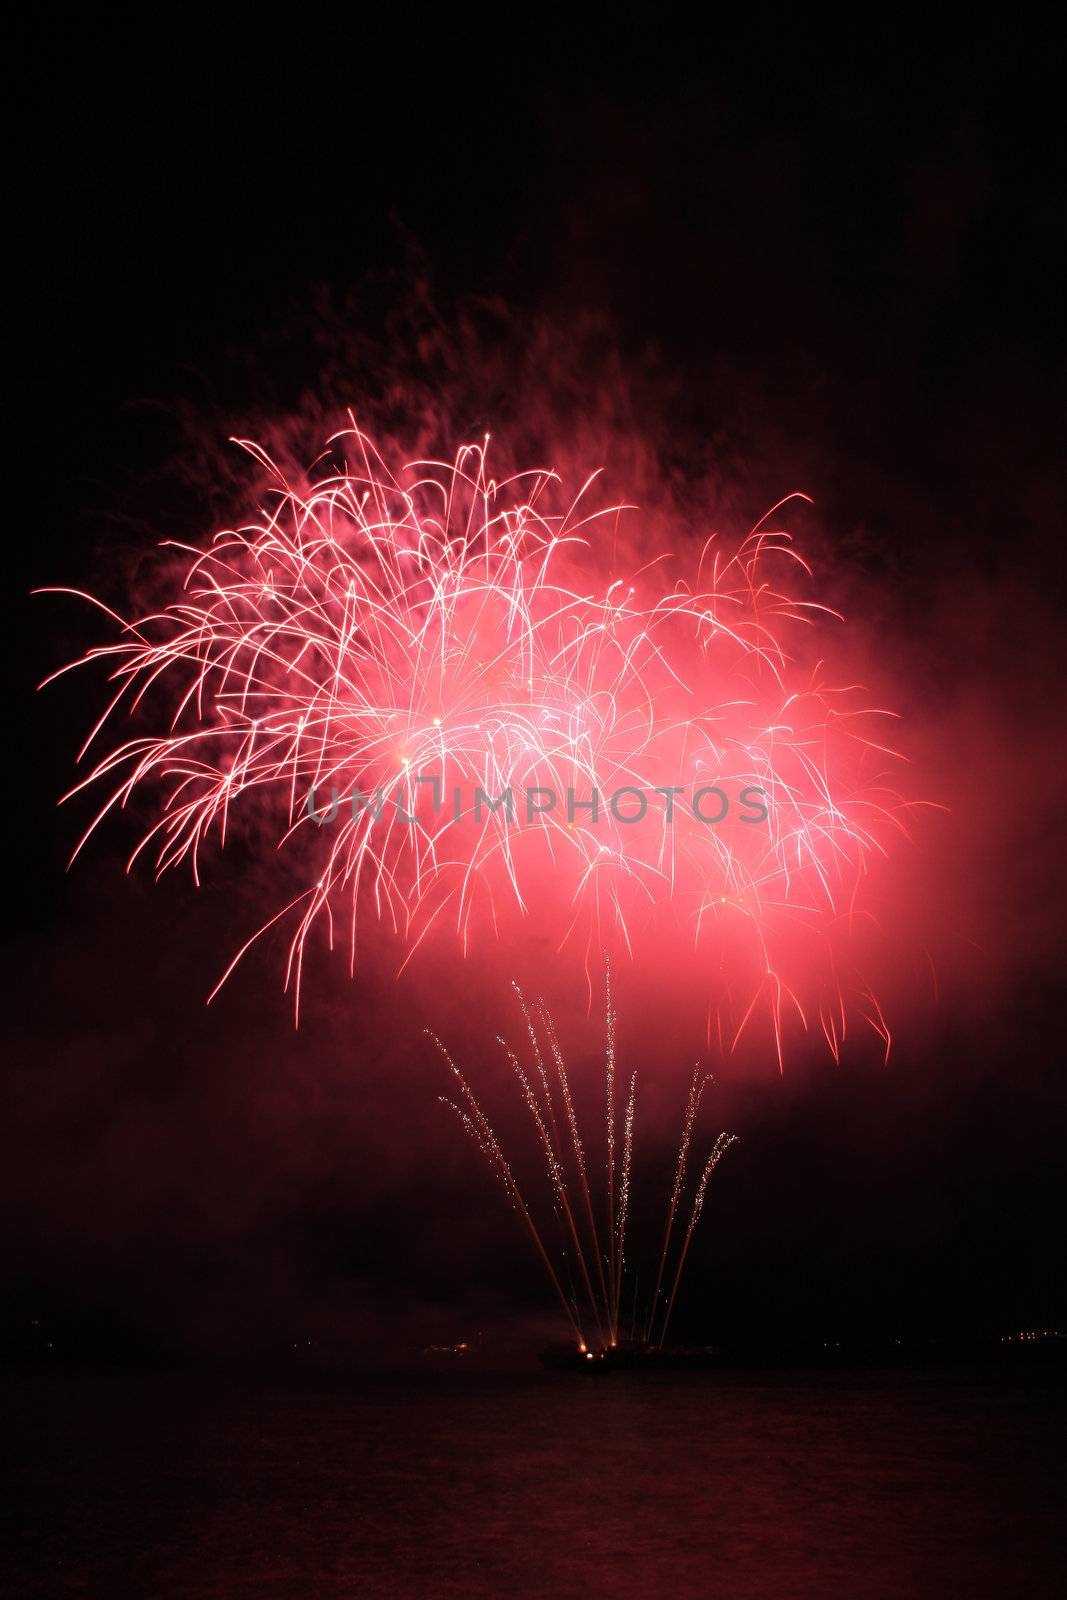 bright red fancy fireworks against the dark sky
